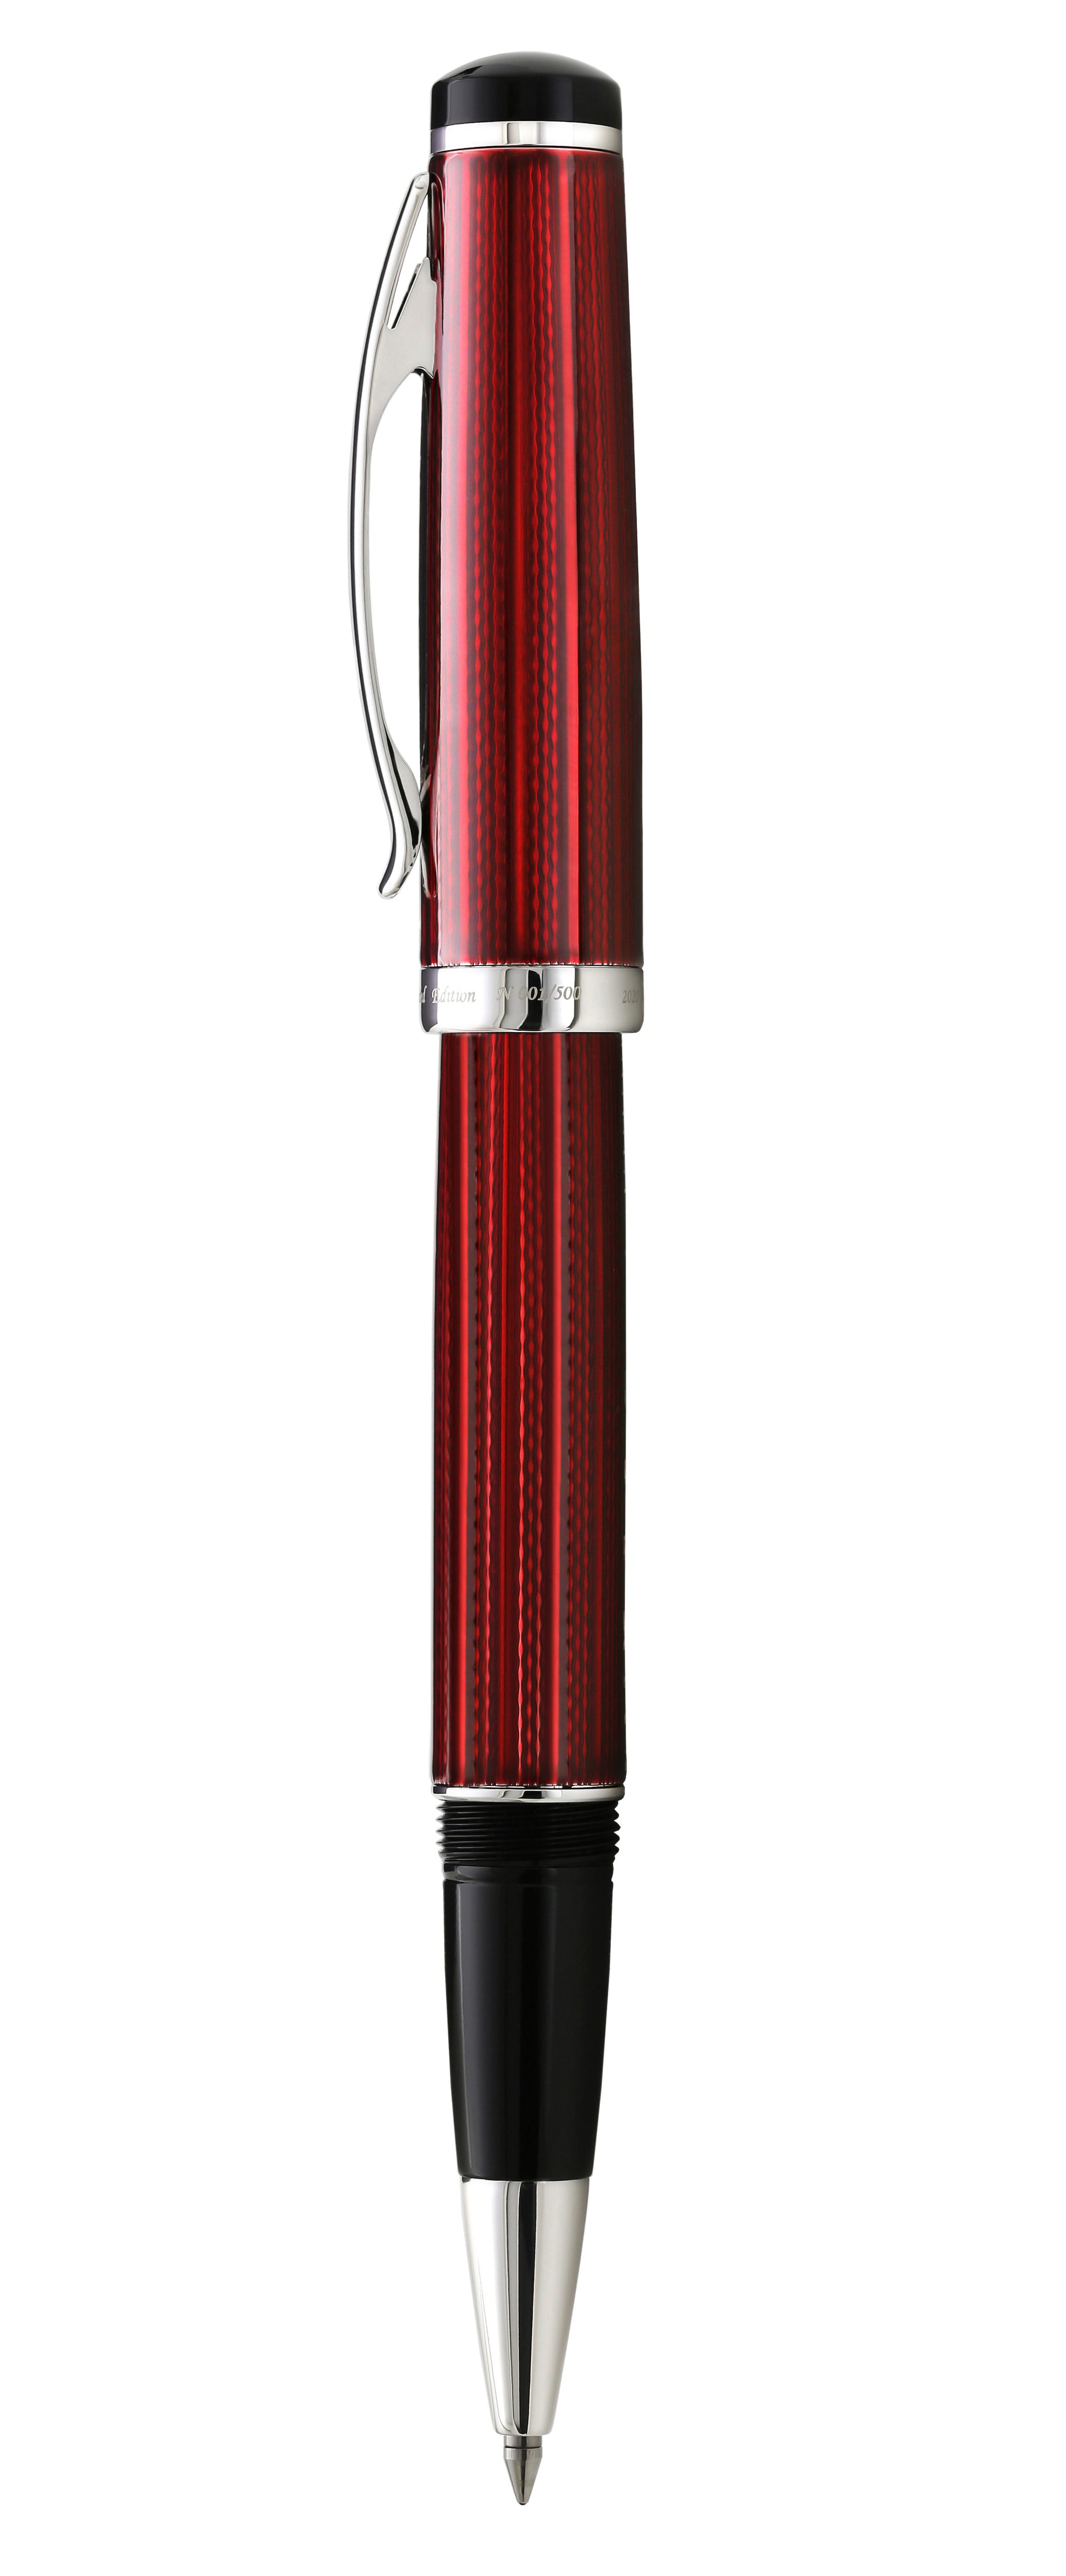 Xezo - Side view of the Incognito Burgundy R-1 rollerball pen